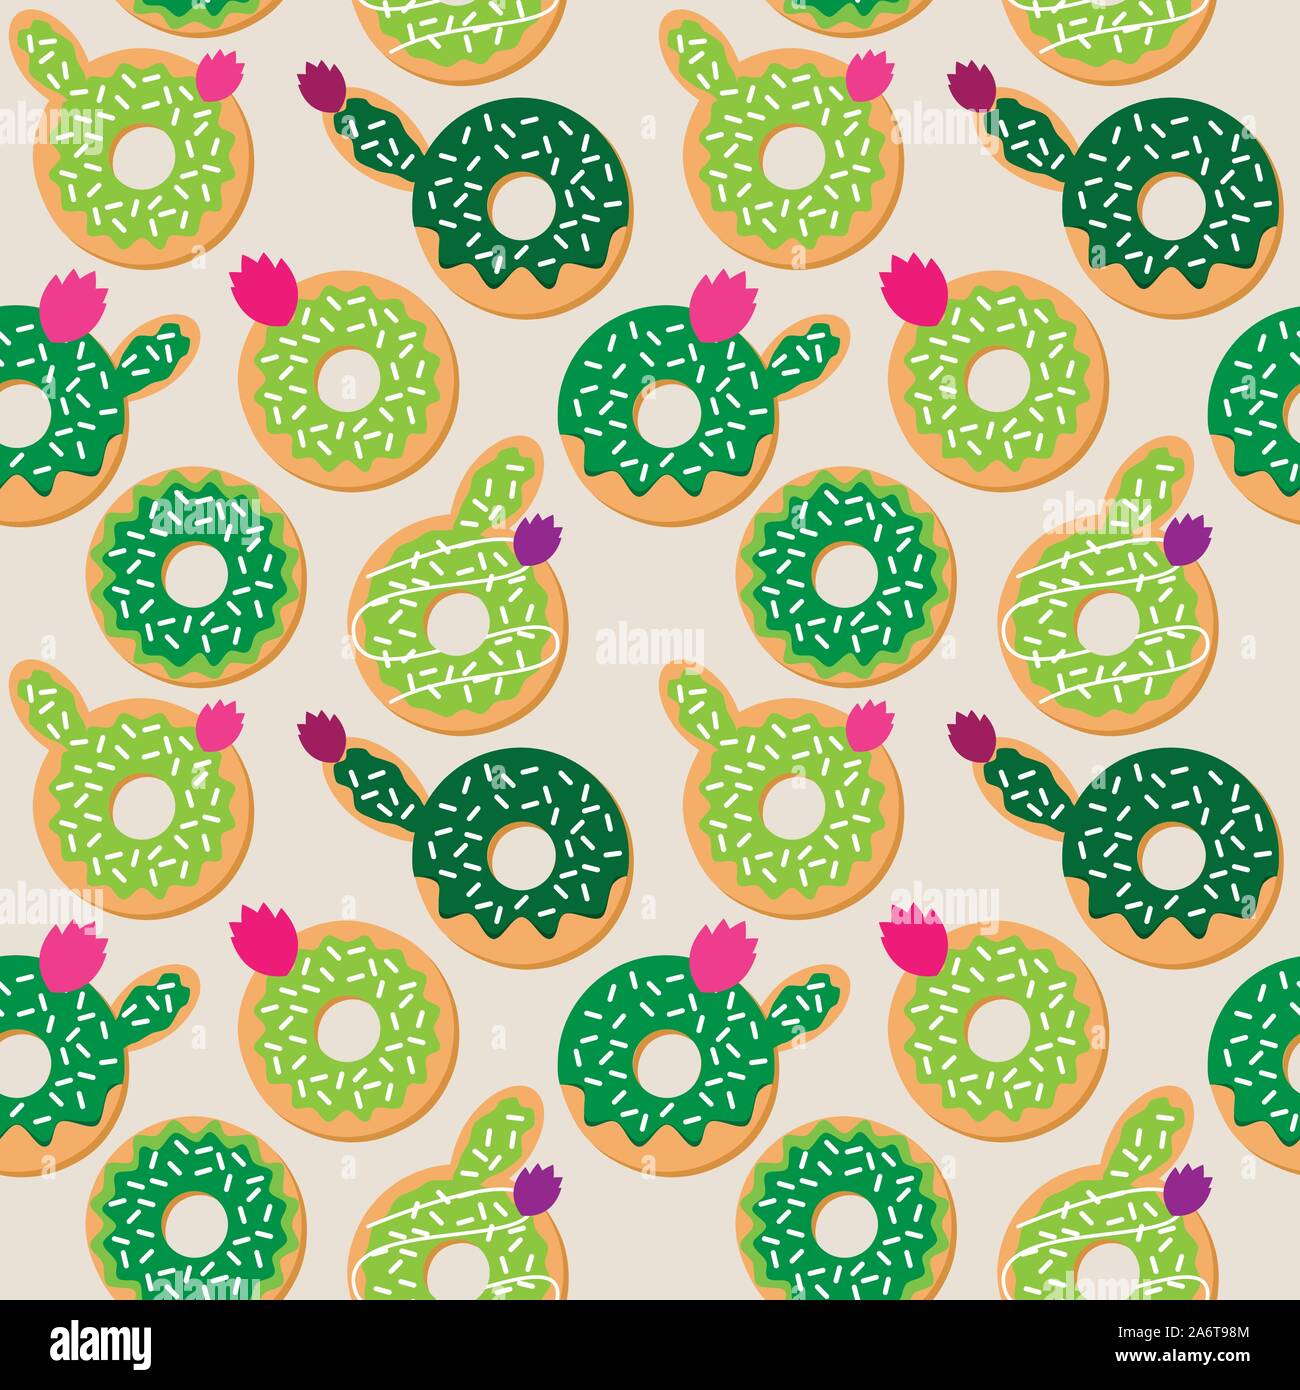 Seamless Vector Background with Cactus and Succulent Themed Donuts Stock Vector